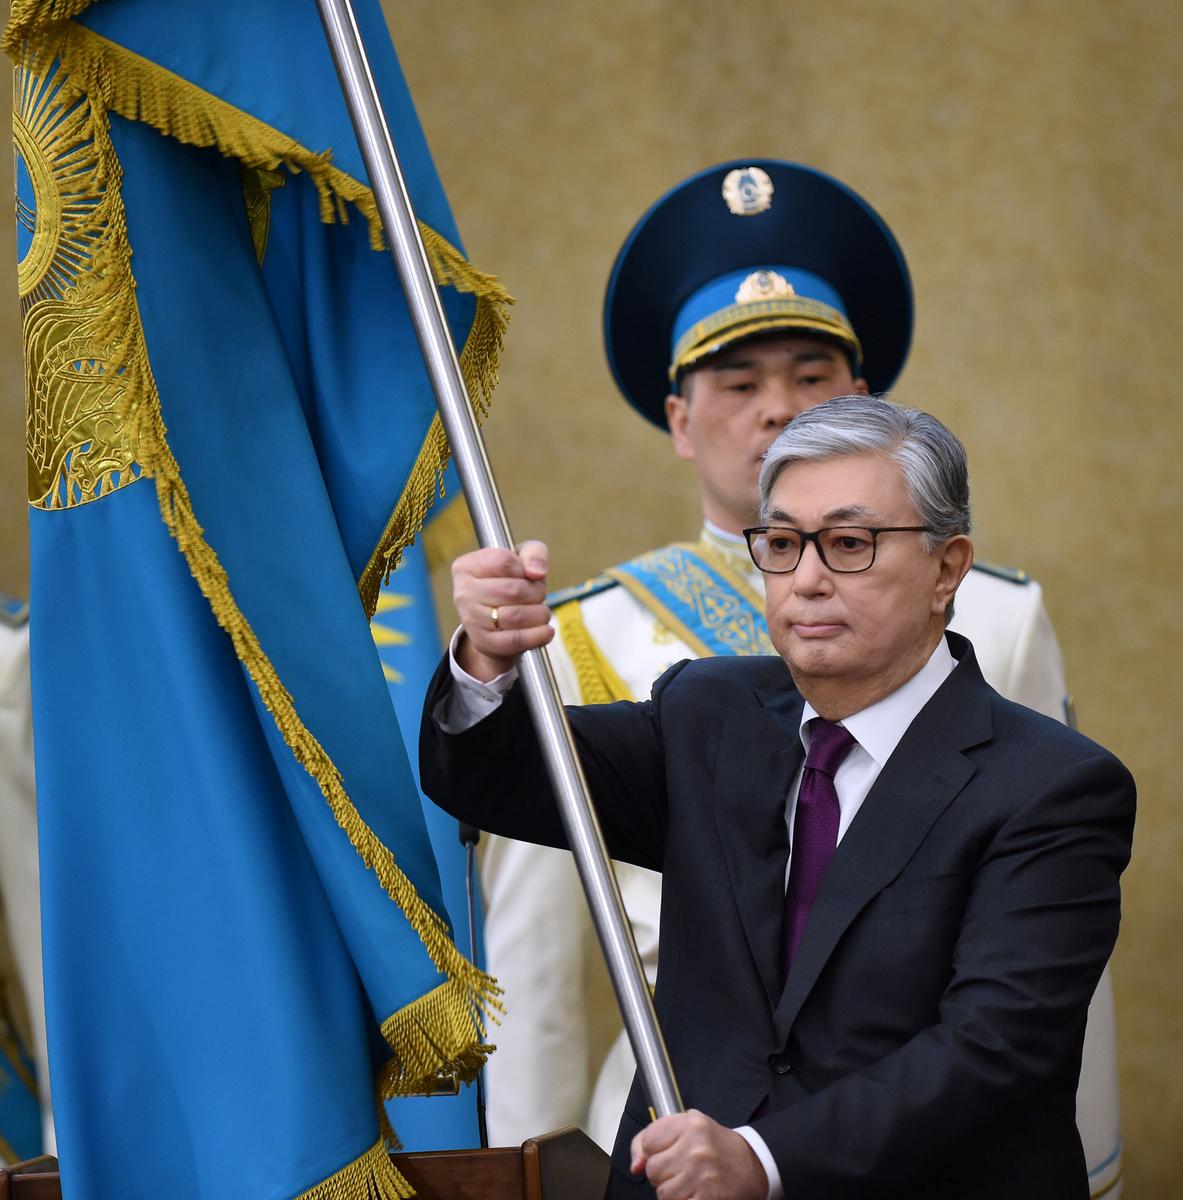 In succession clue, Kazakh leader's daughter elevated after his resignation